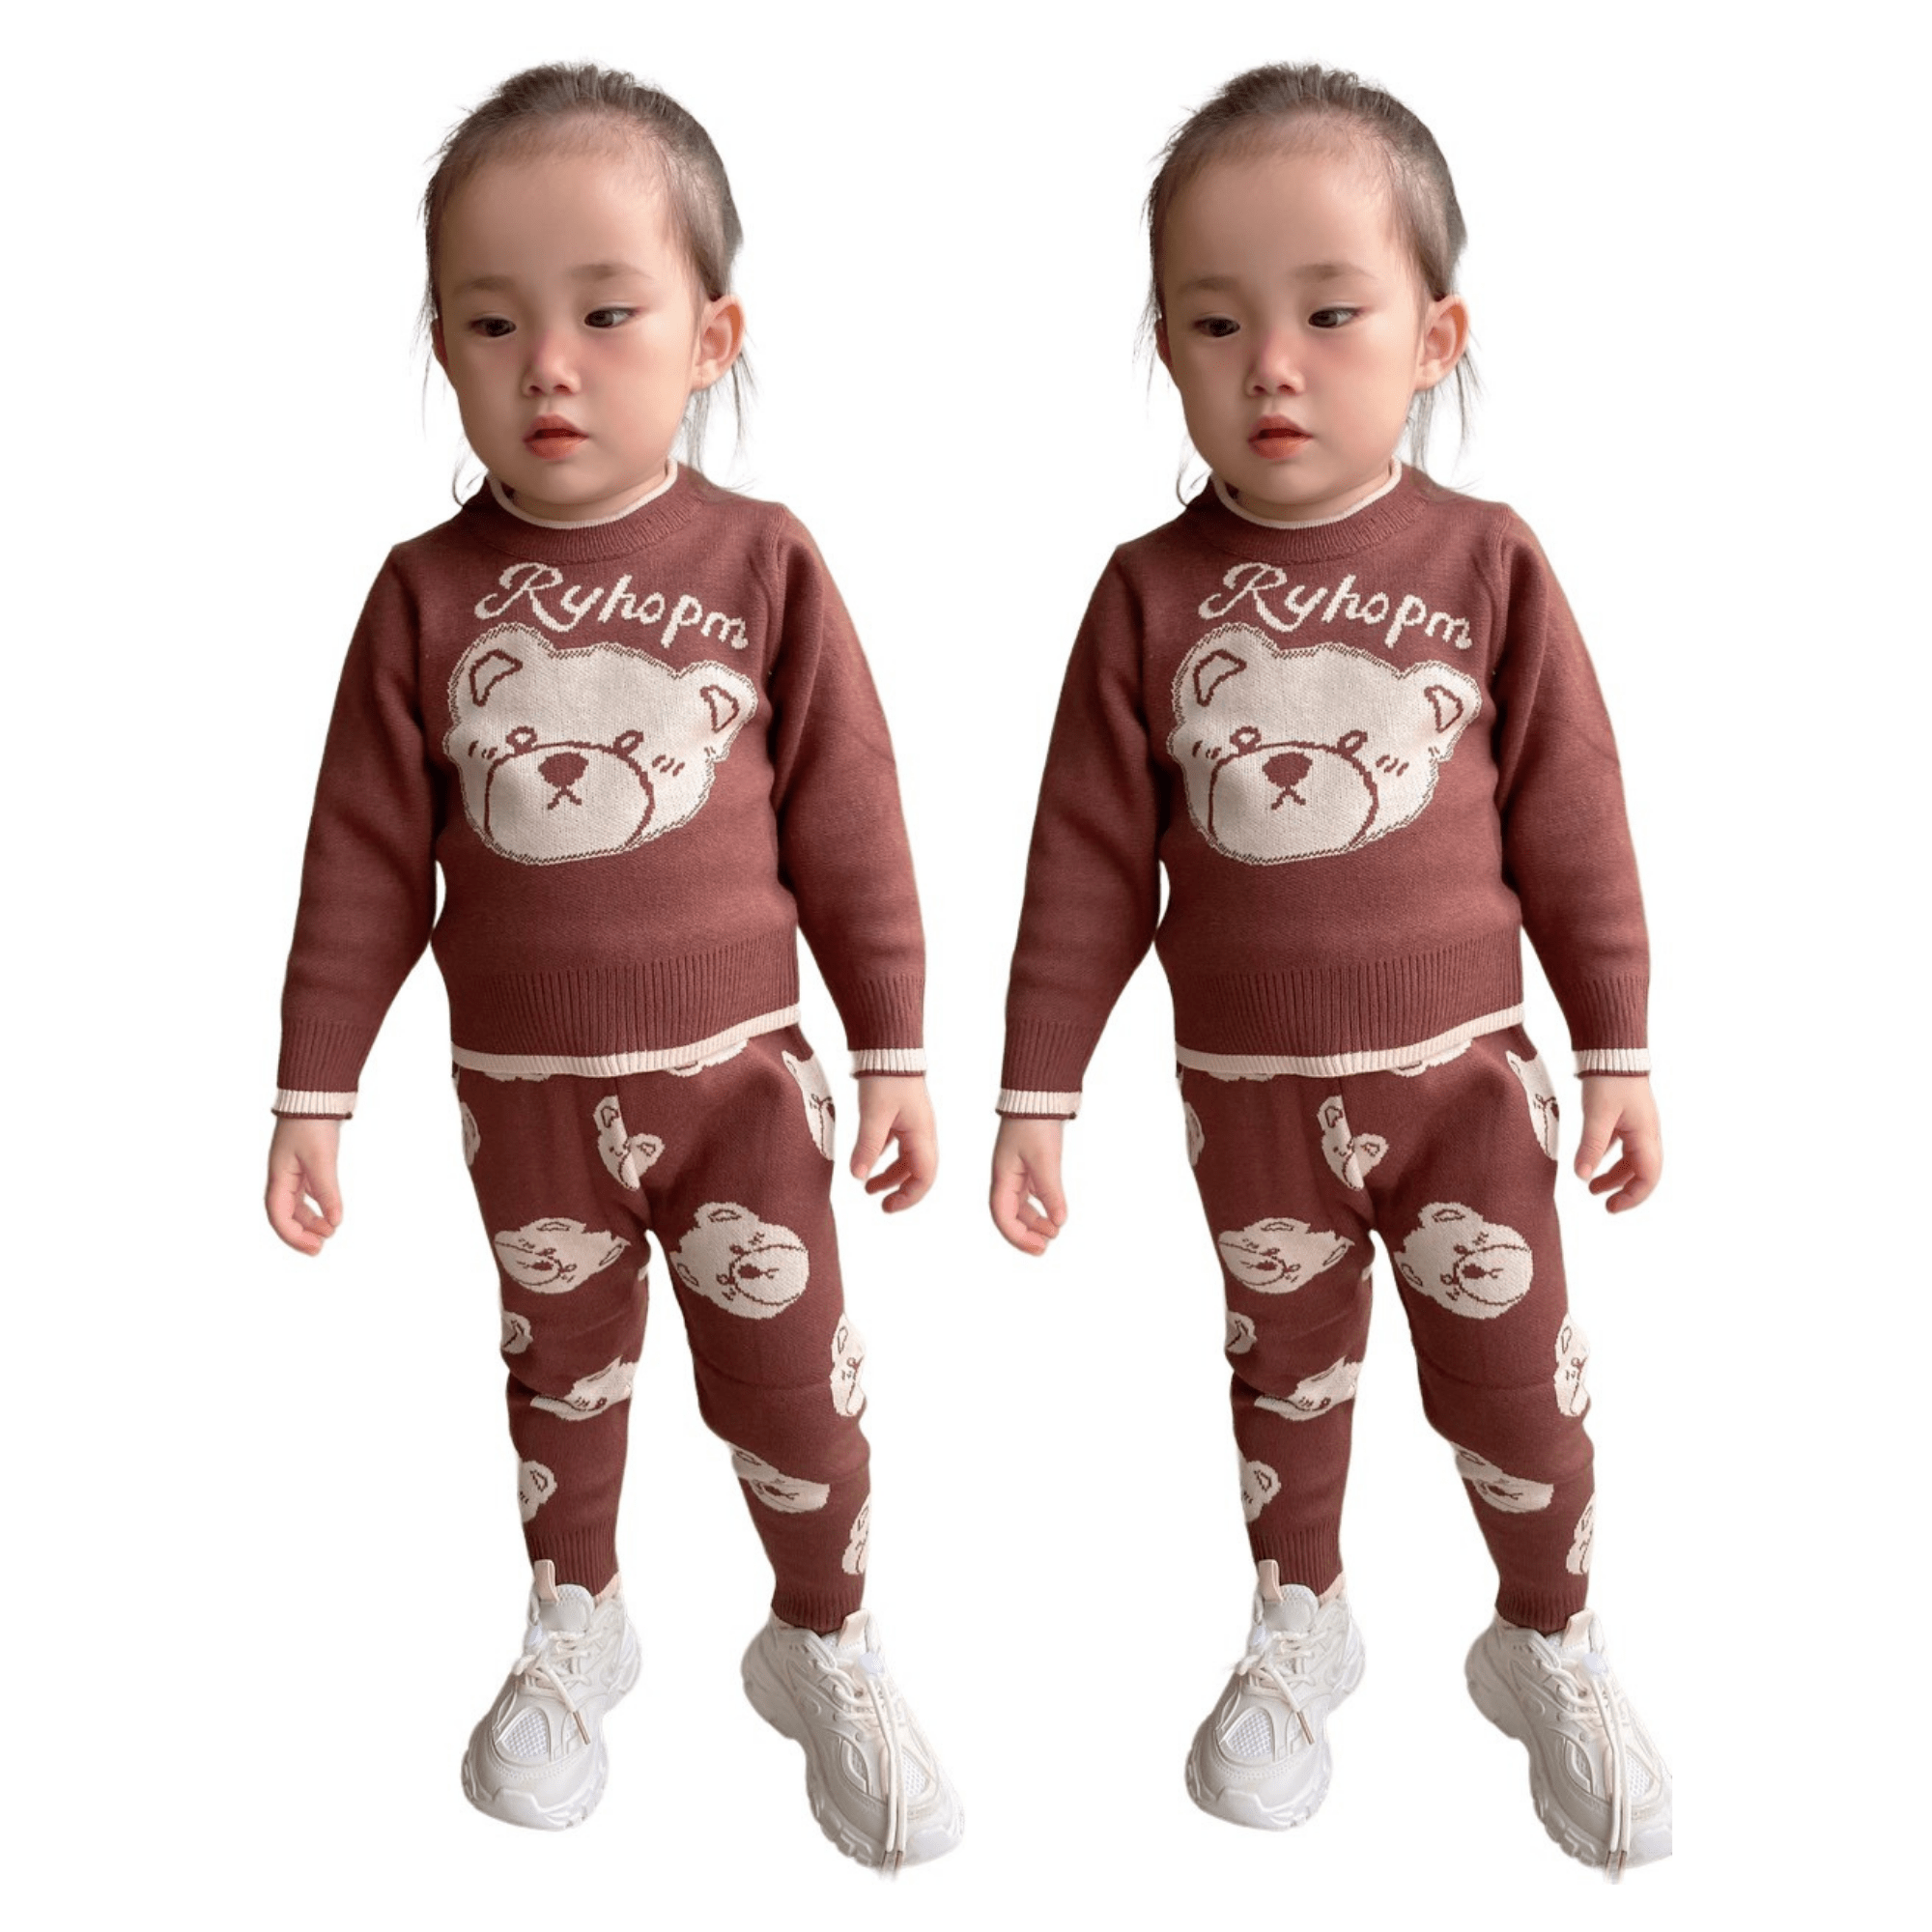 Clothes For Kids Girls Competitive Price Natural Woolen Set Casual Each One In Opp Bag From Vietnam Manufacturer 2